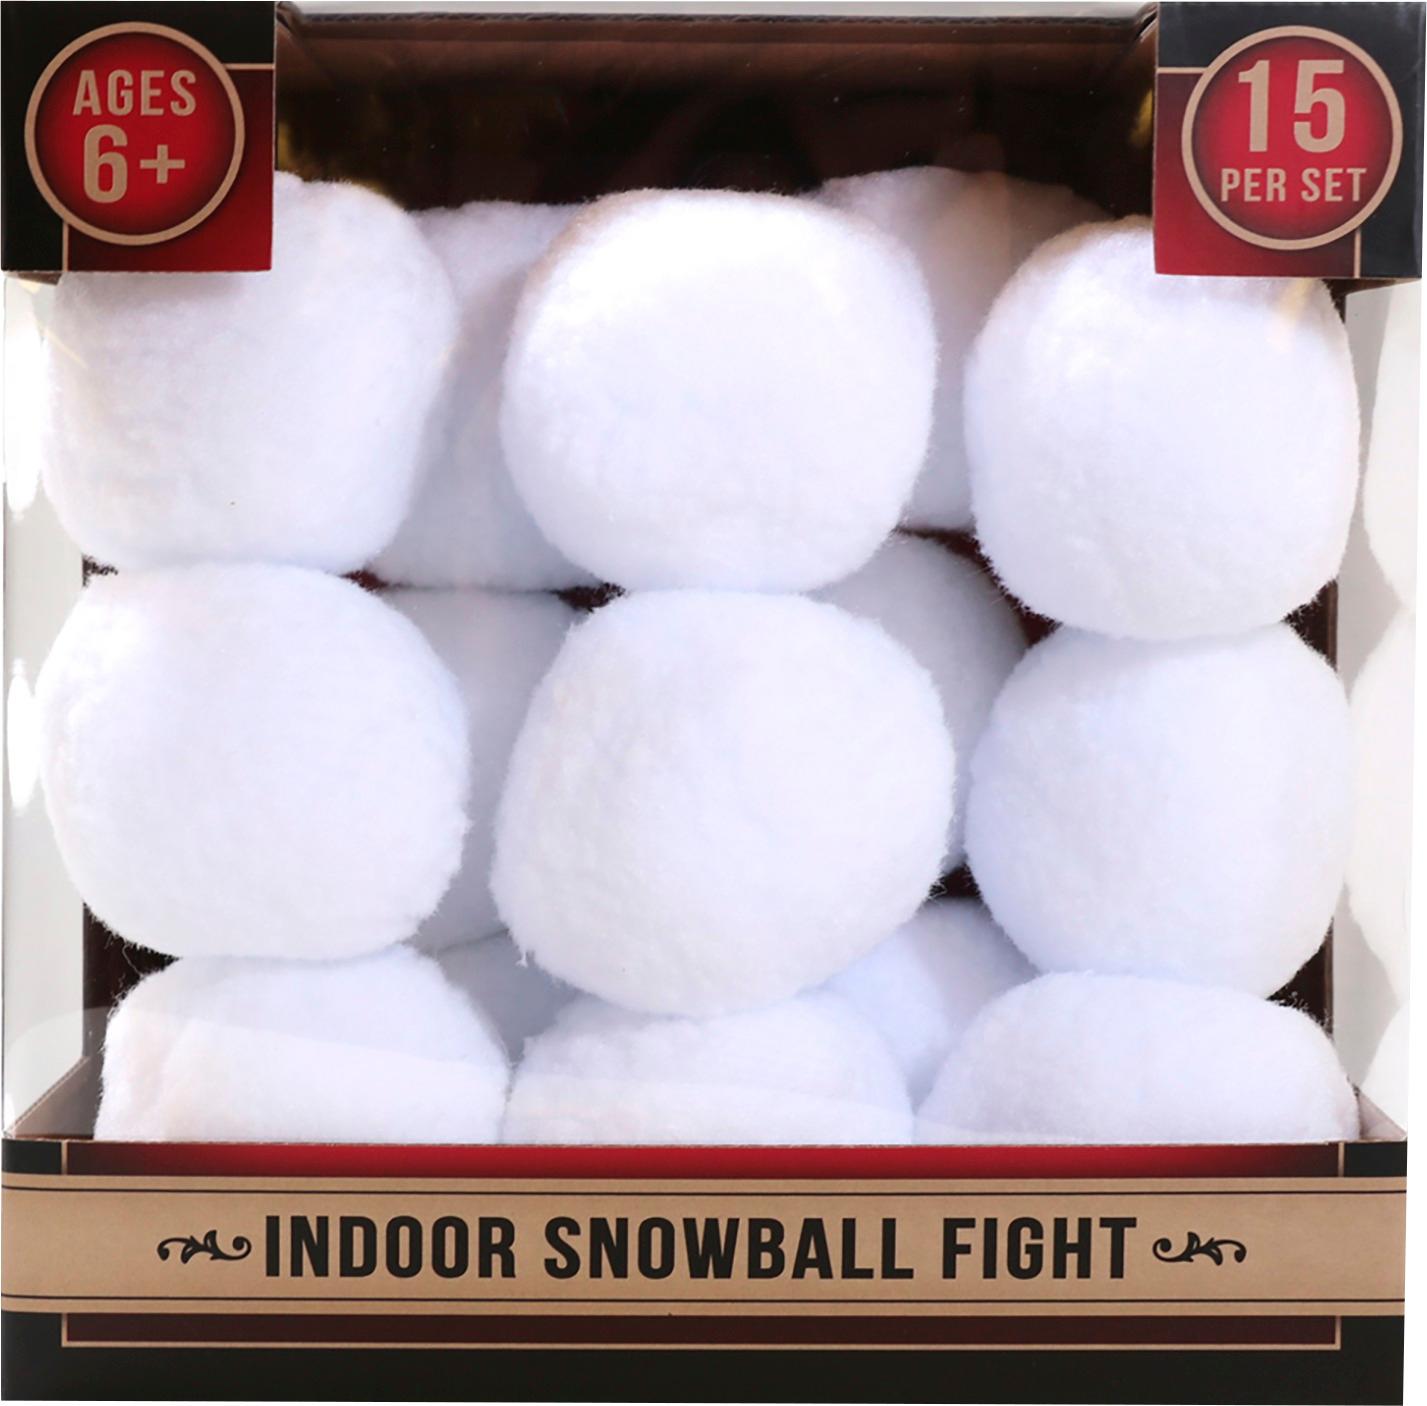 Brookstone Indoor Snowball Fight - 24 Soft White Snowballs No Mess or Cold  Temp!